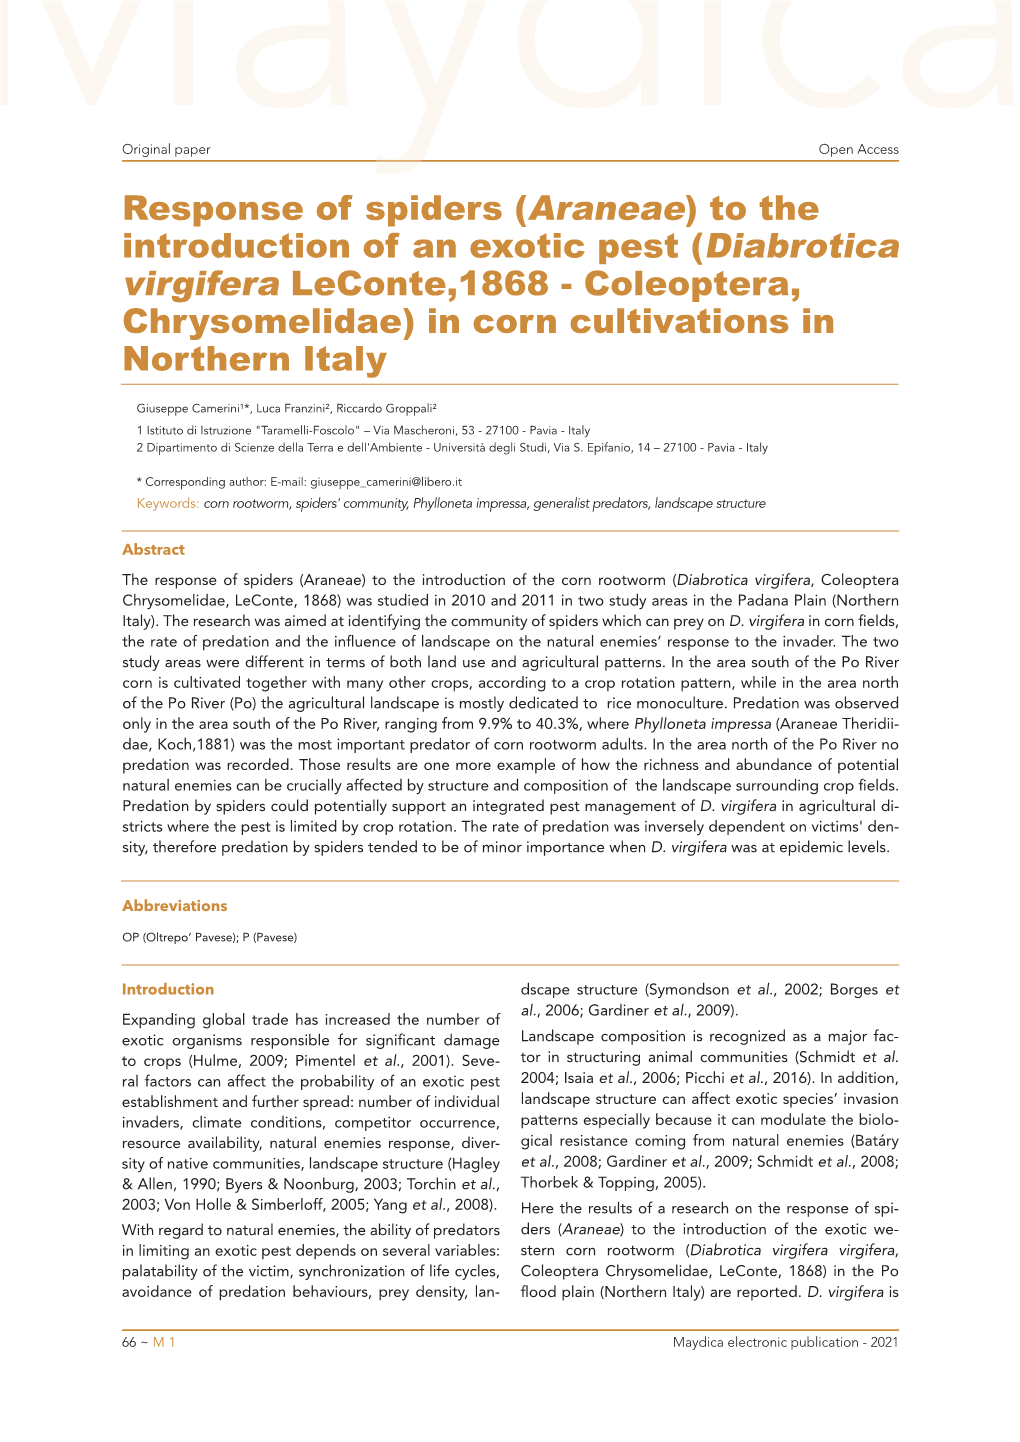 (Araneae) to the Introduction of an Exotic Pest (Diabrotica Virgifera Leconte,1868 - Coleoptera, Chrysomelidae) in Corn Cultivations in Northern Italy